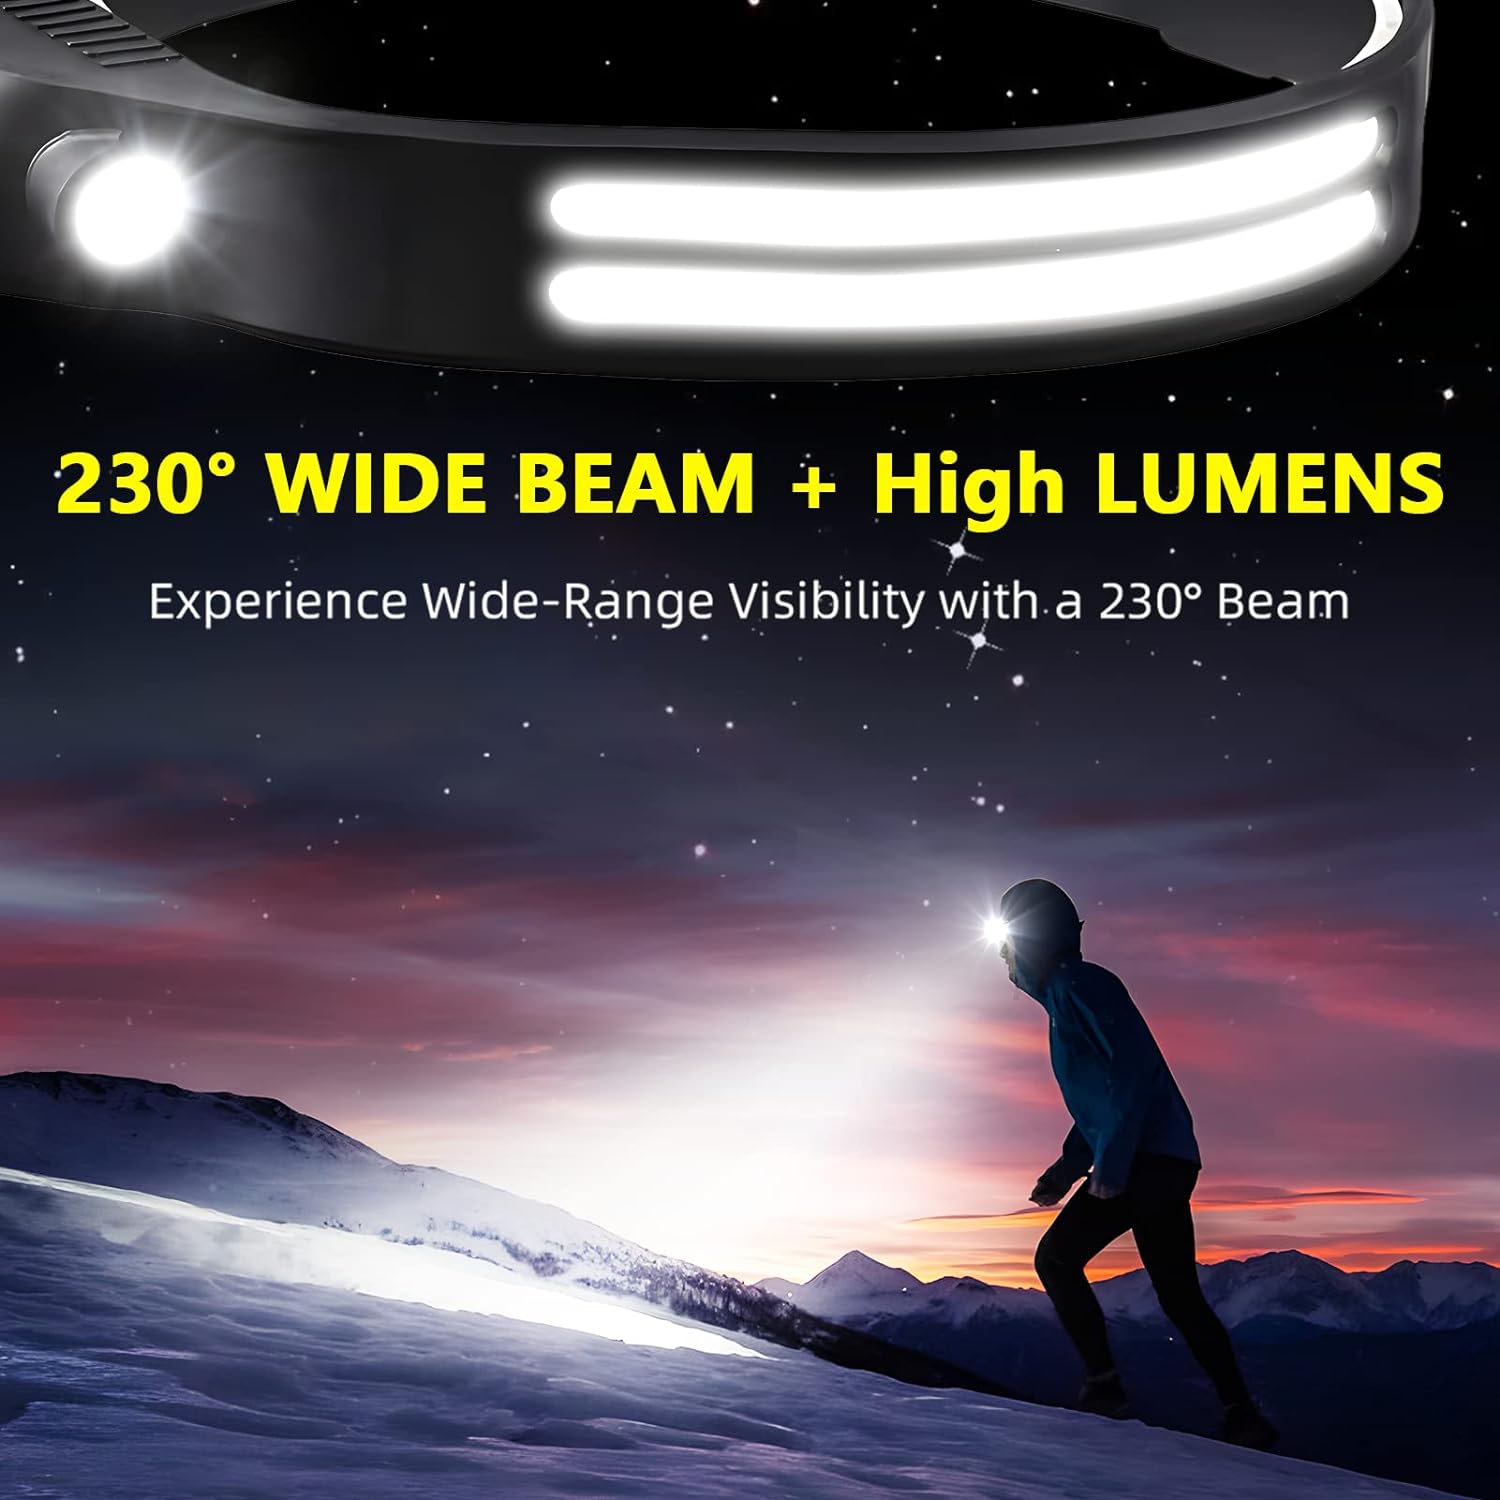 LED Headlamp Rechargeable 1PCS - 230° COB Super Bright Head Lights for Forehead, Hard hat Light for Adults, USB C Headband Flashlight for Working, Hiking, Running, Camping Essentials Accessories Gear